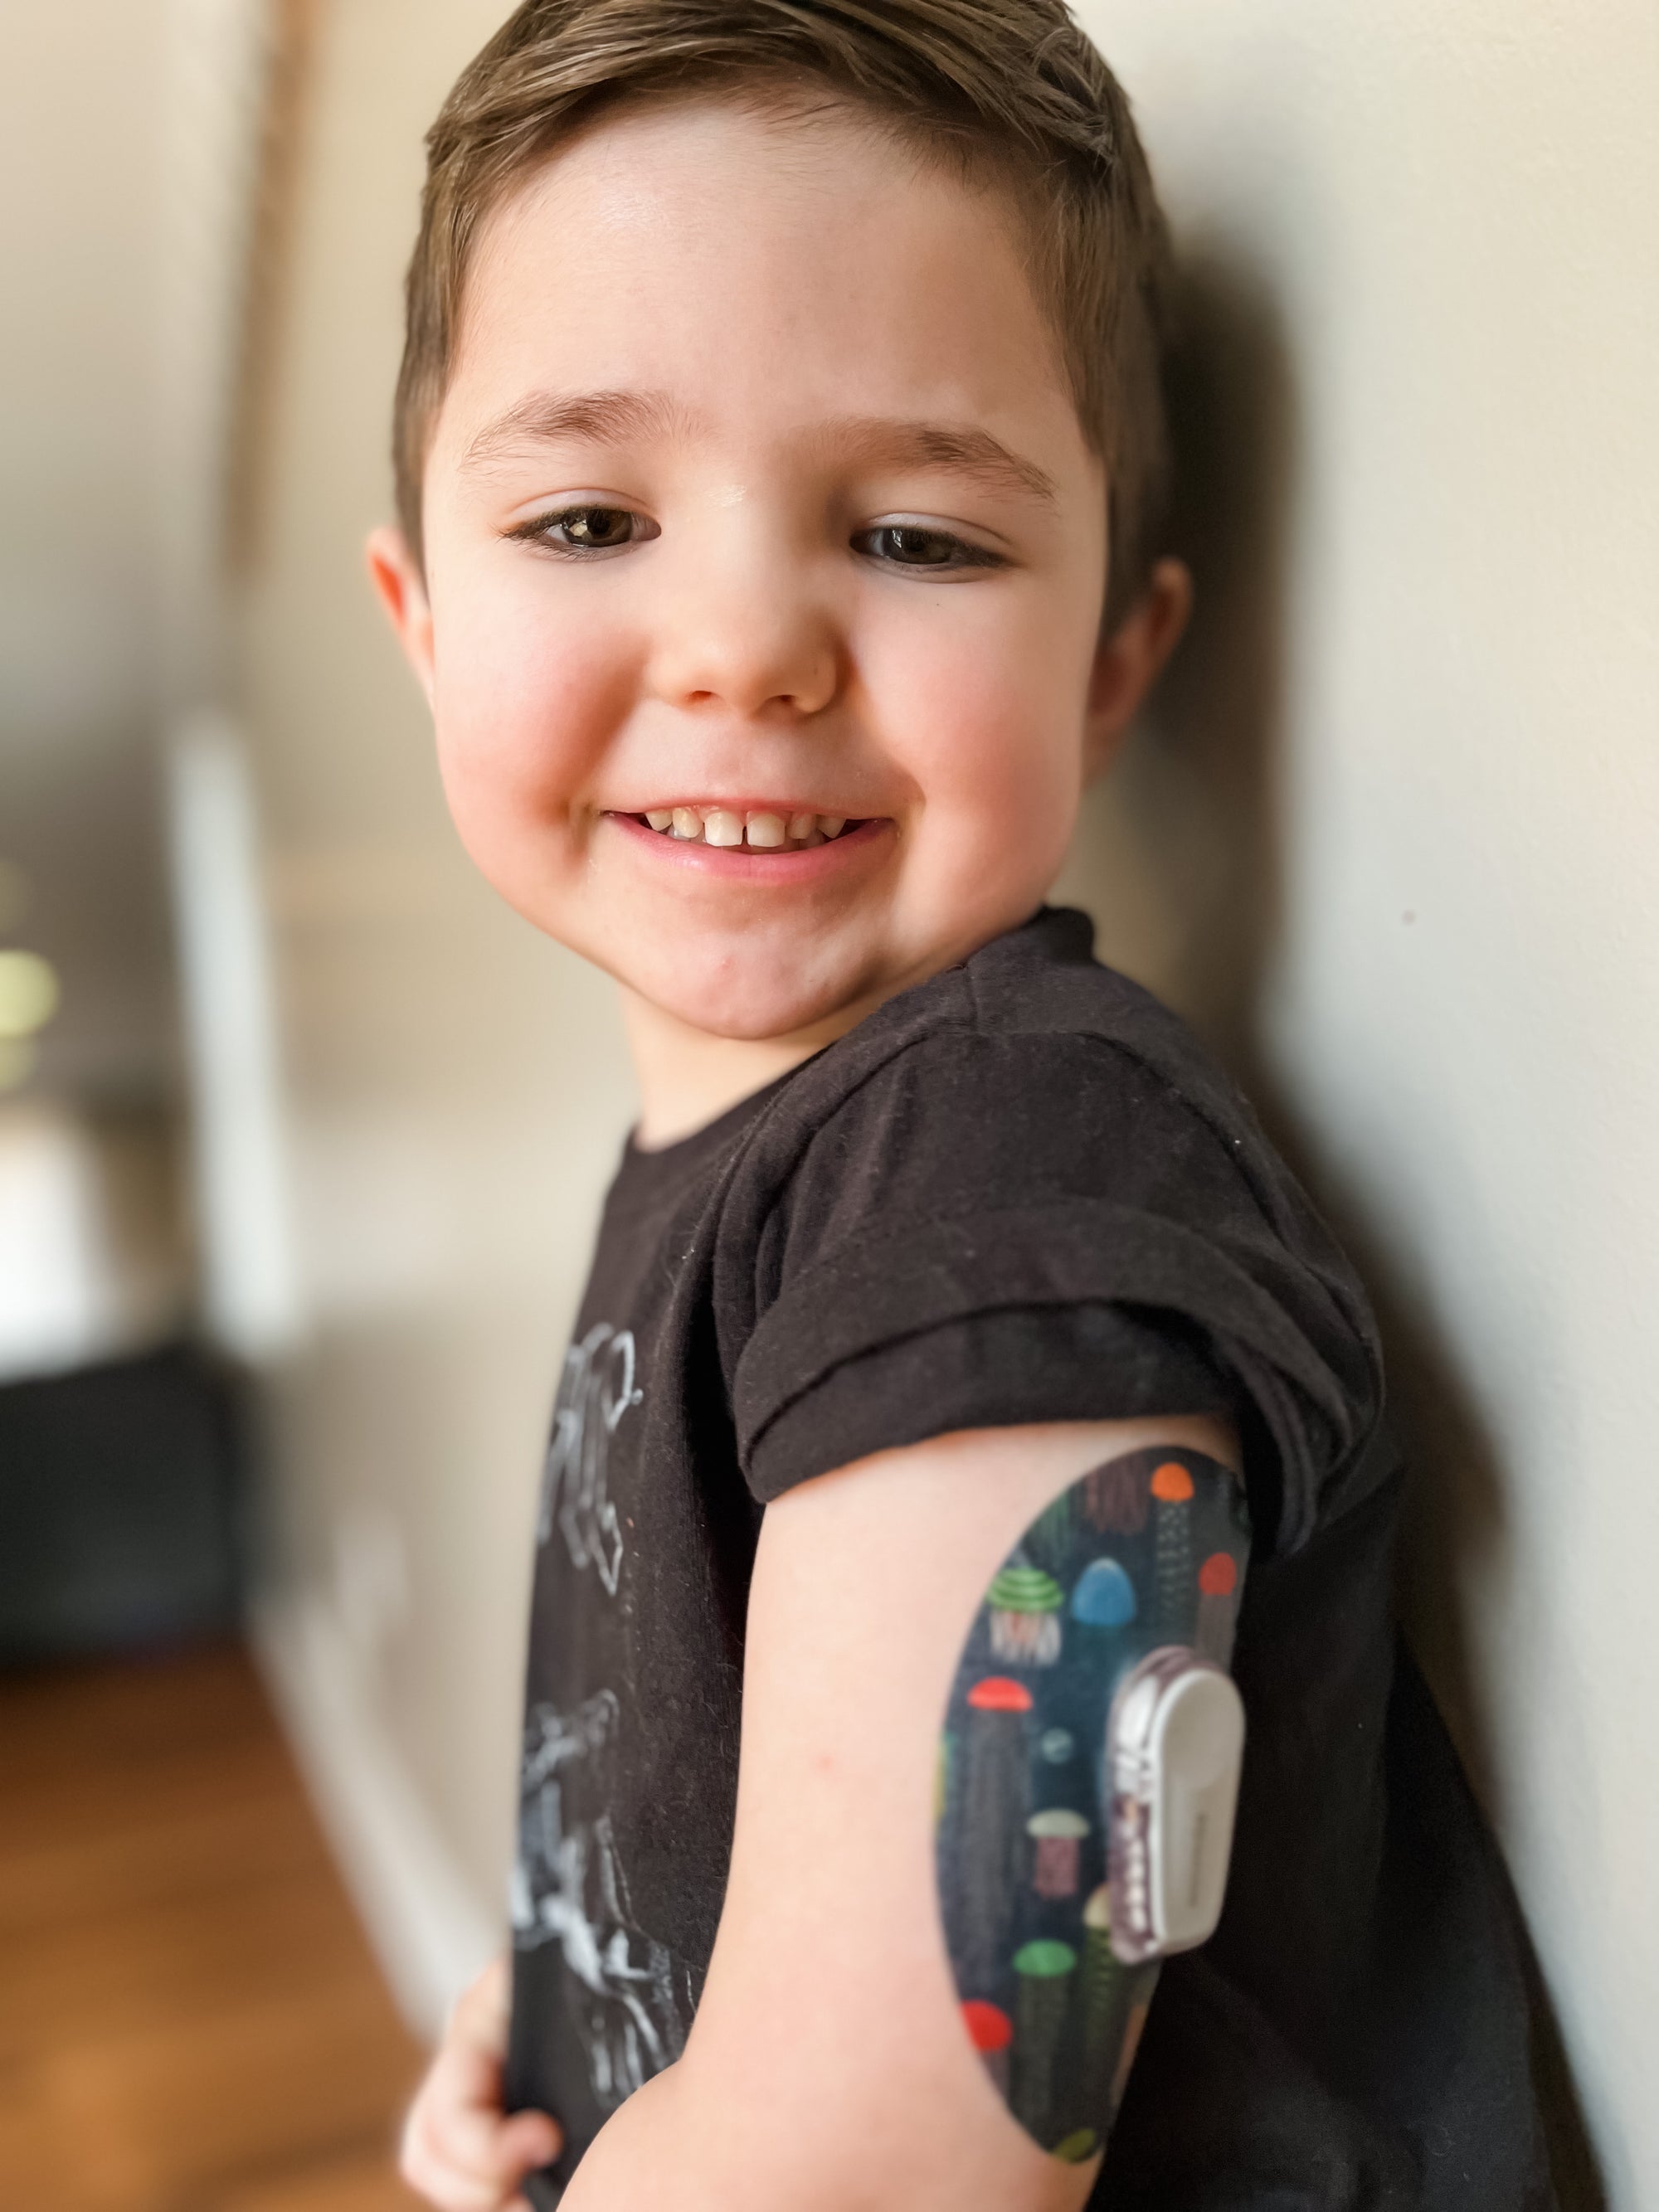 ExpressionMed, Air And Sea Variety Pack Dexcom G6 Tape, Toddler Wearing Dexcom G6 Jelly Fish Themed CGM Plaster Patch Design